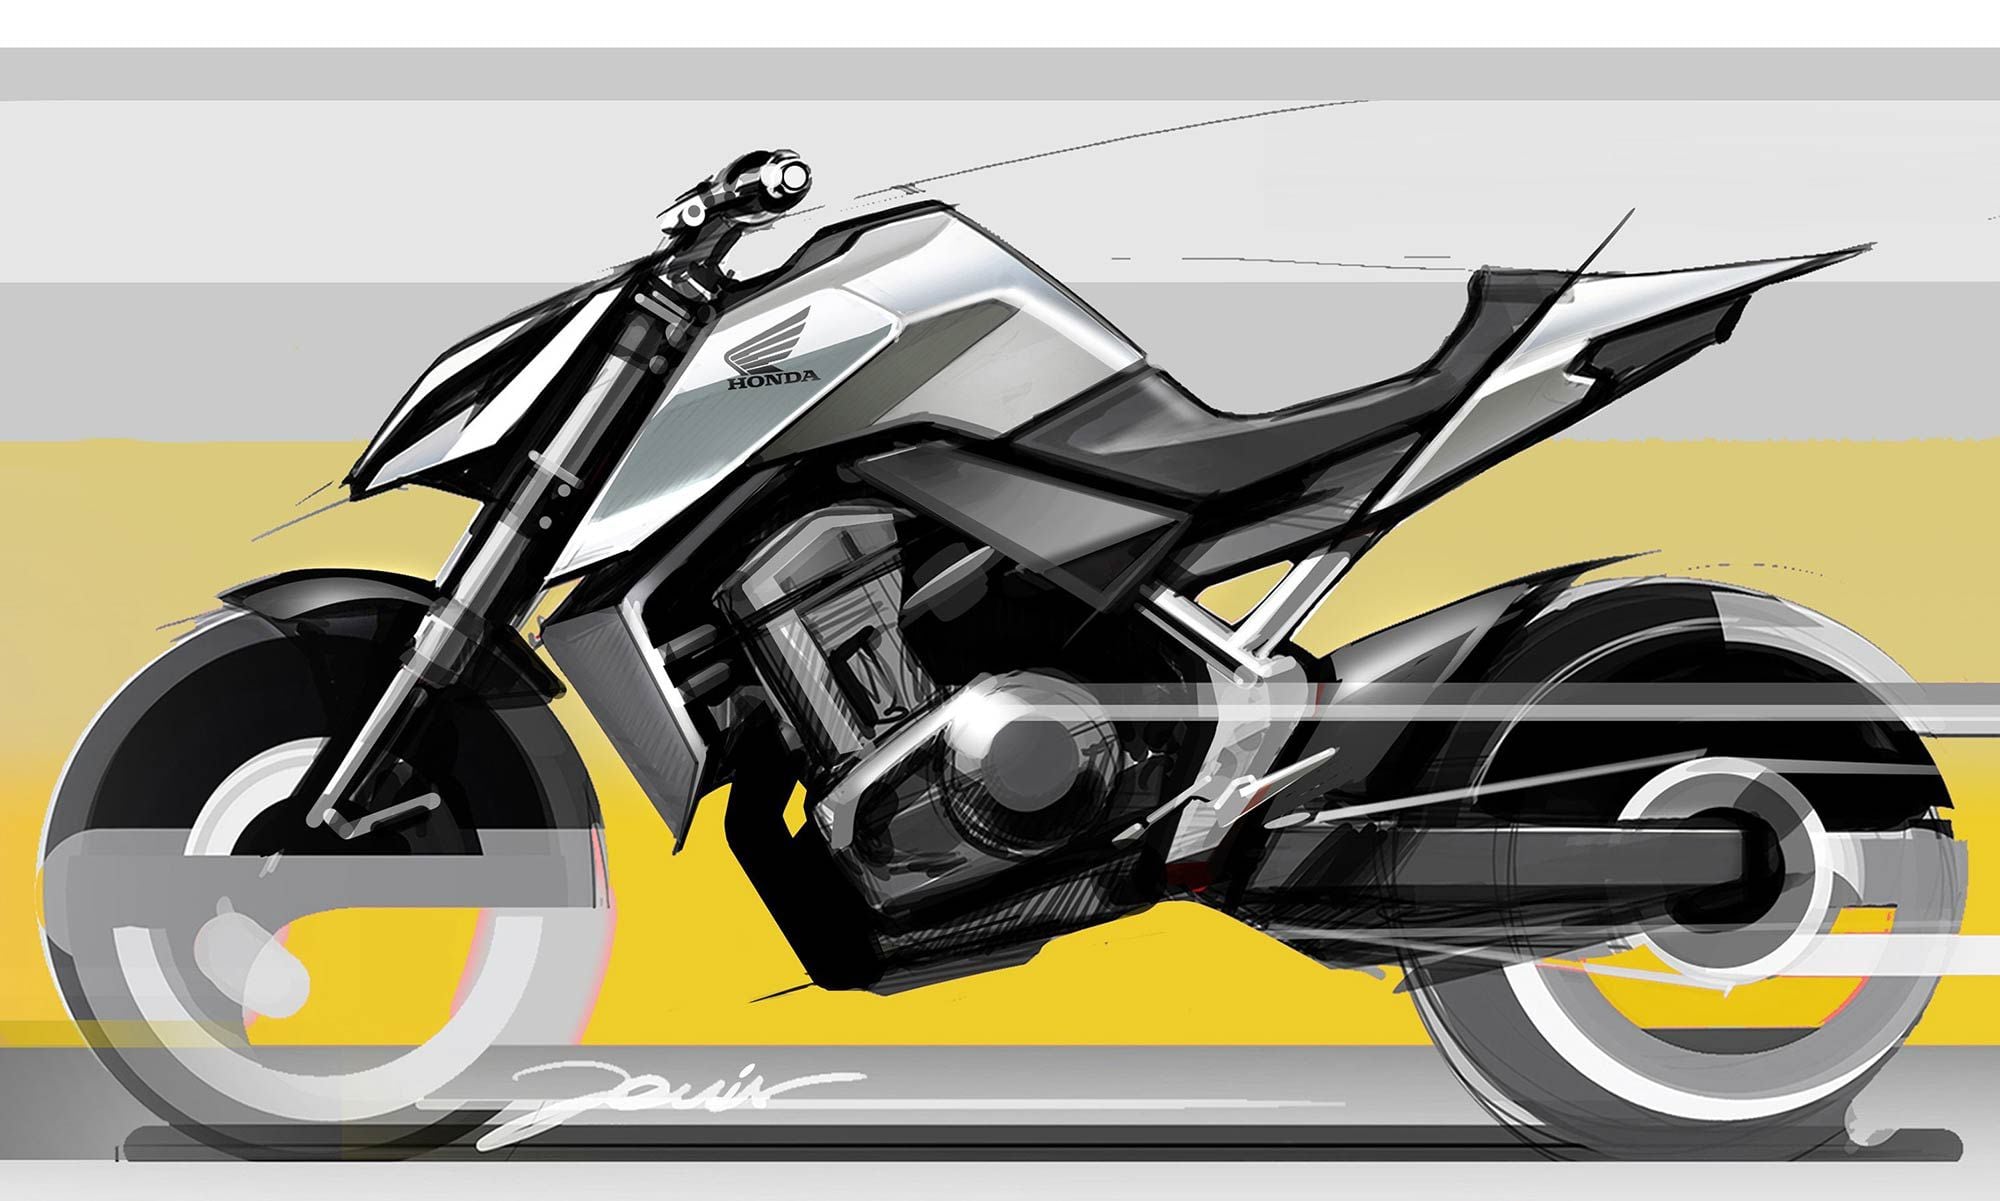 Design concepts of the new Hornet show a sharp and aggressive streetfighter, worthy of the name.